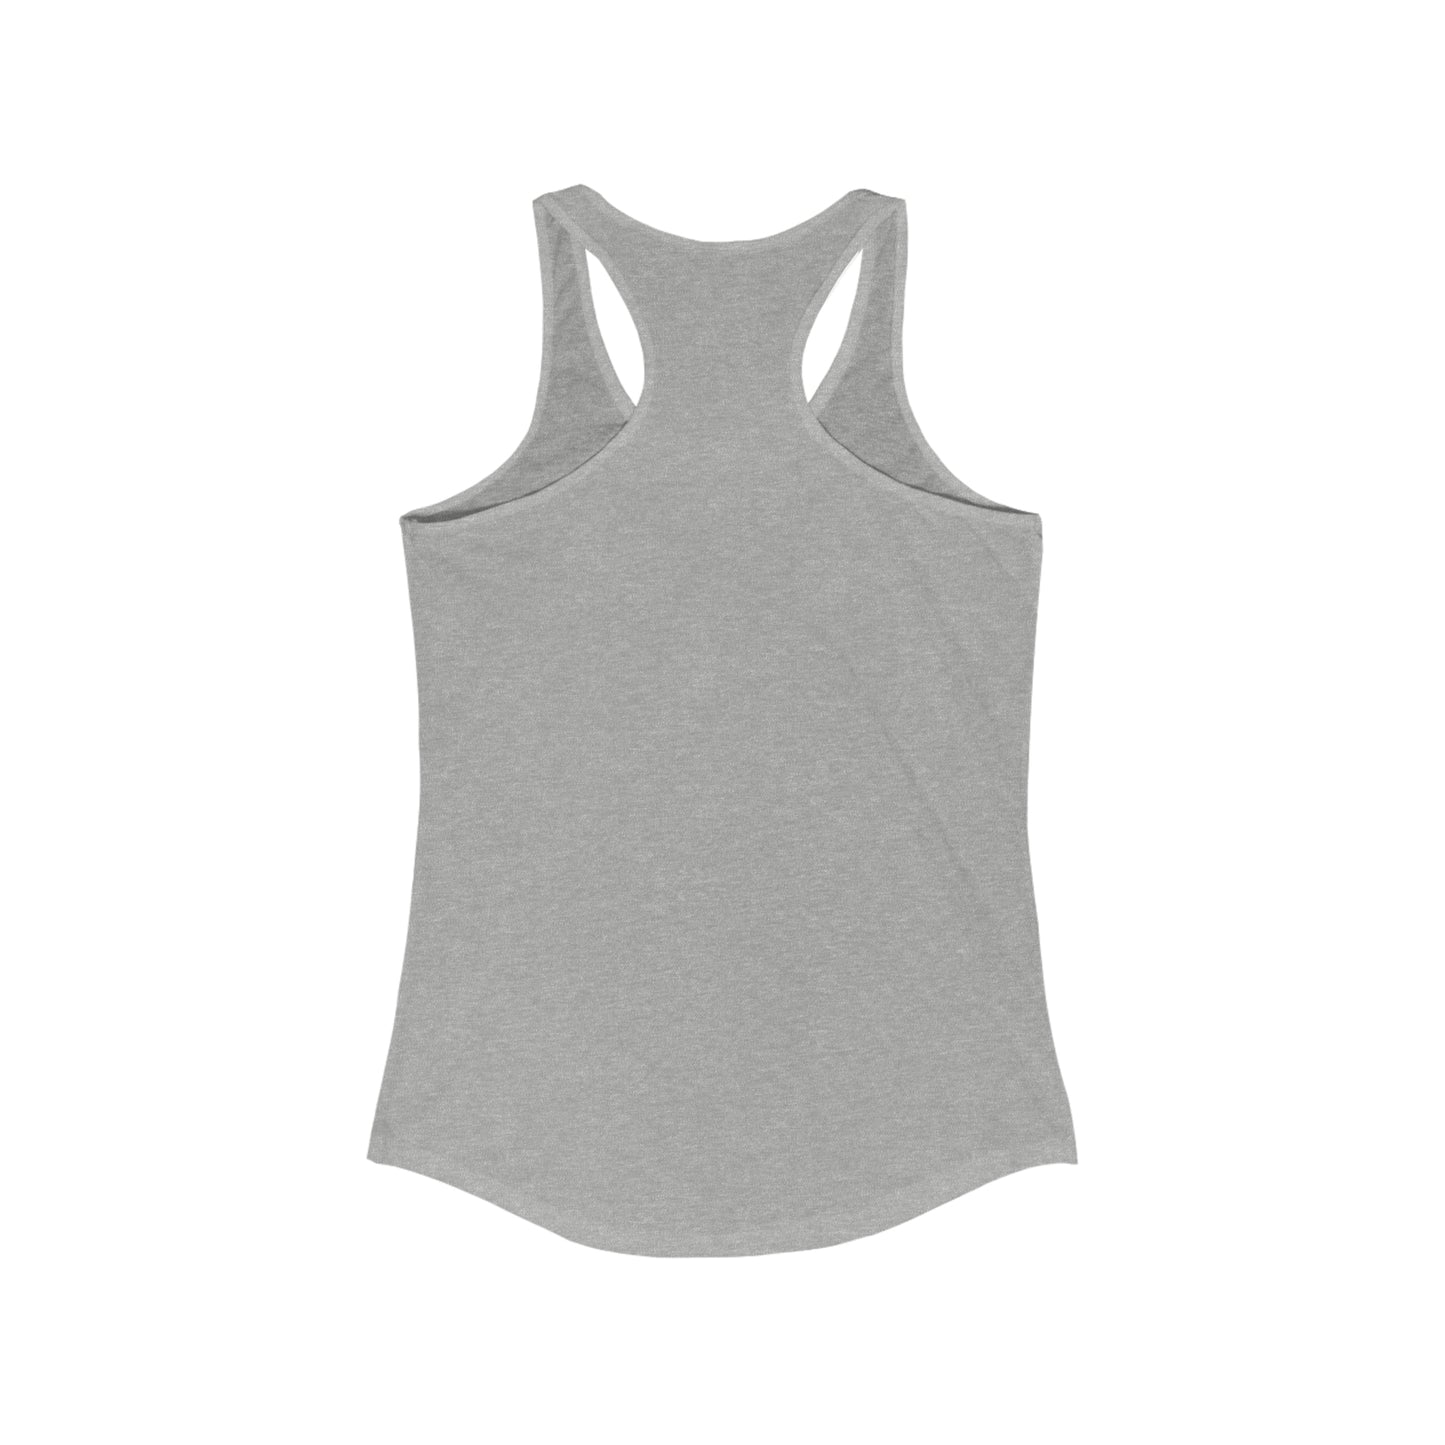 divinely inspired purposefully created slim fit tank-top